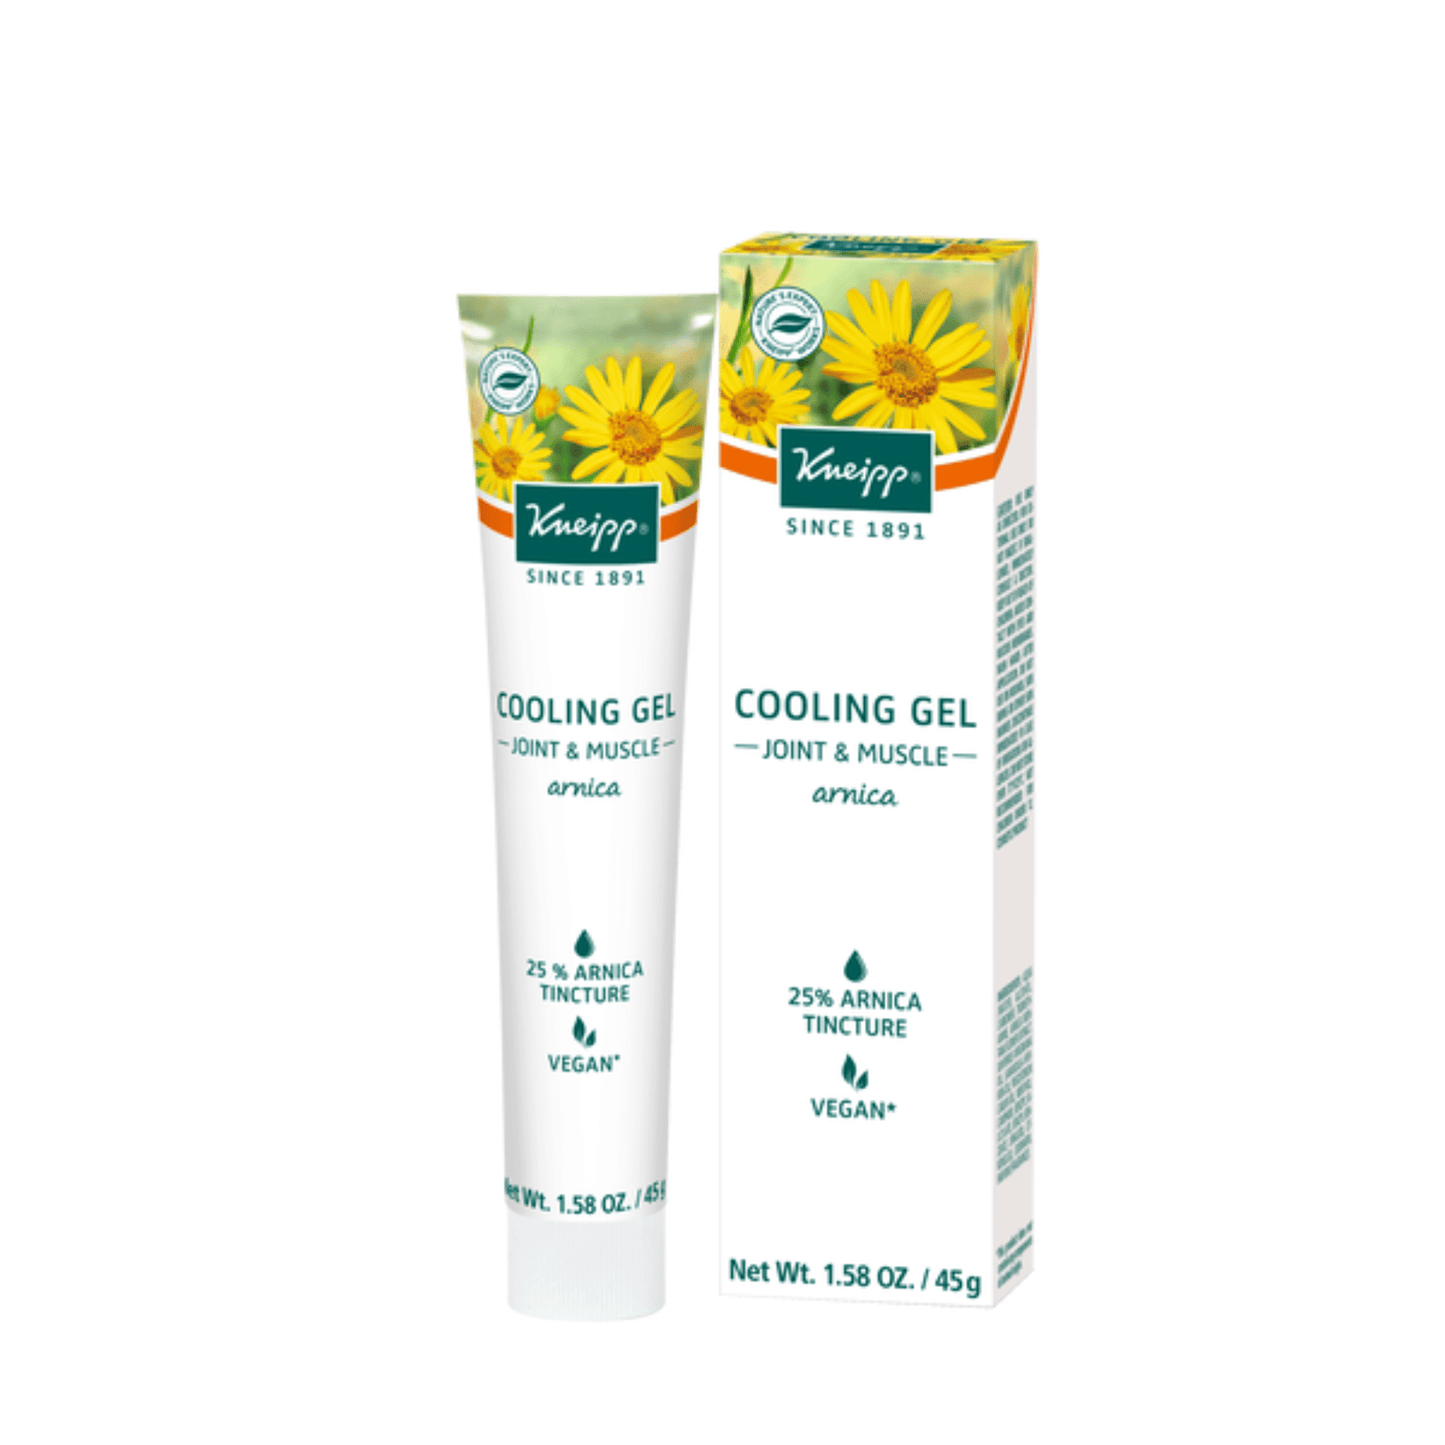 Primary Image of Arnica Joint & Muscle Cooling Gel